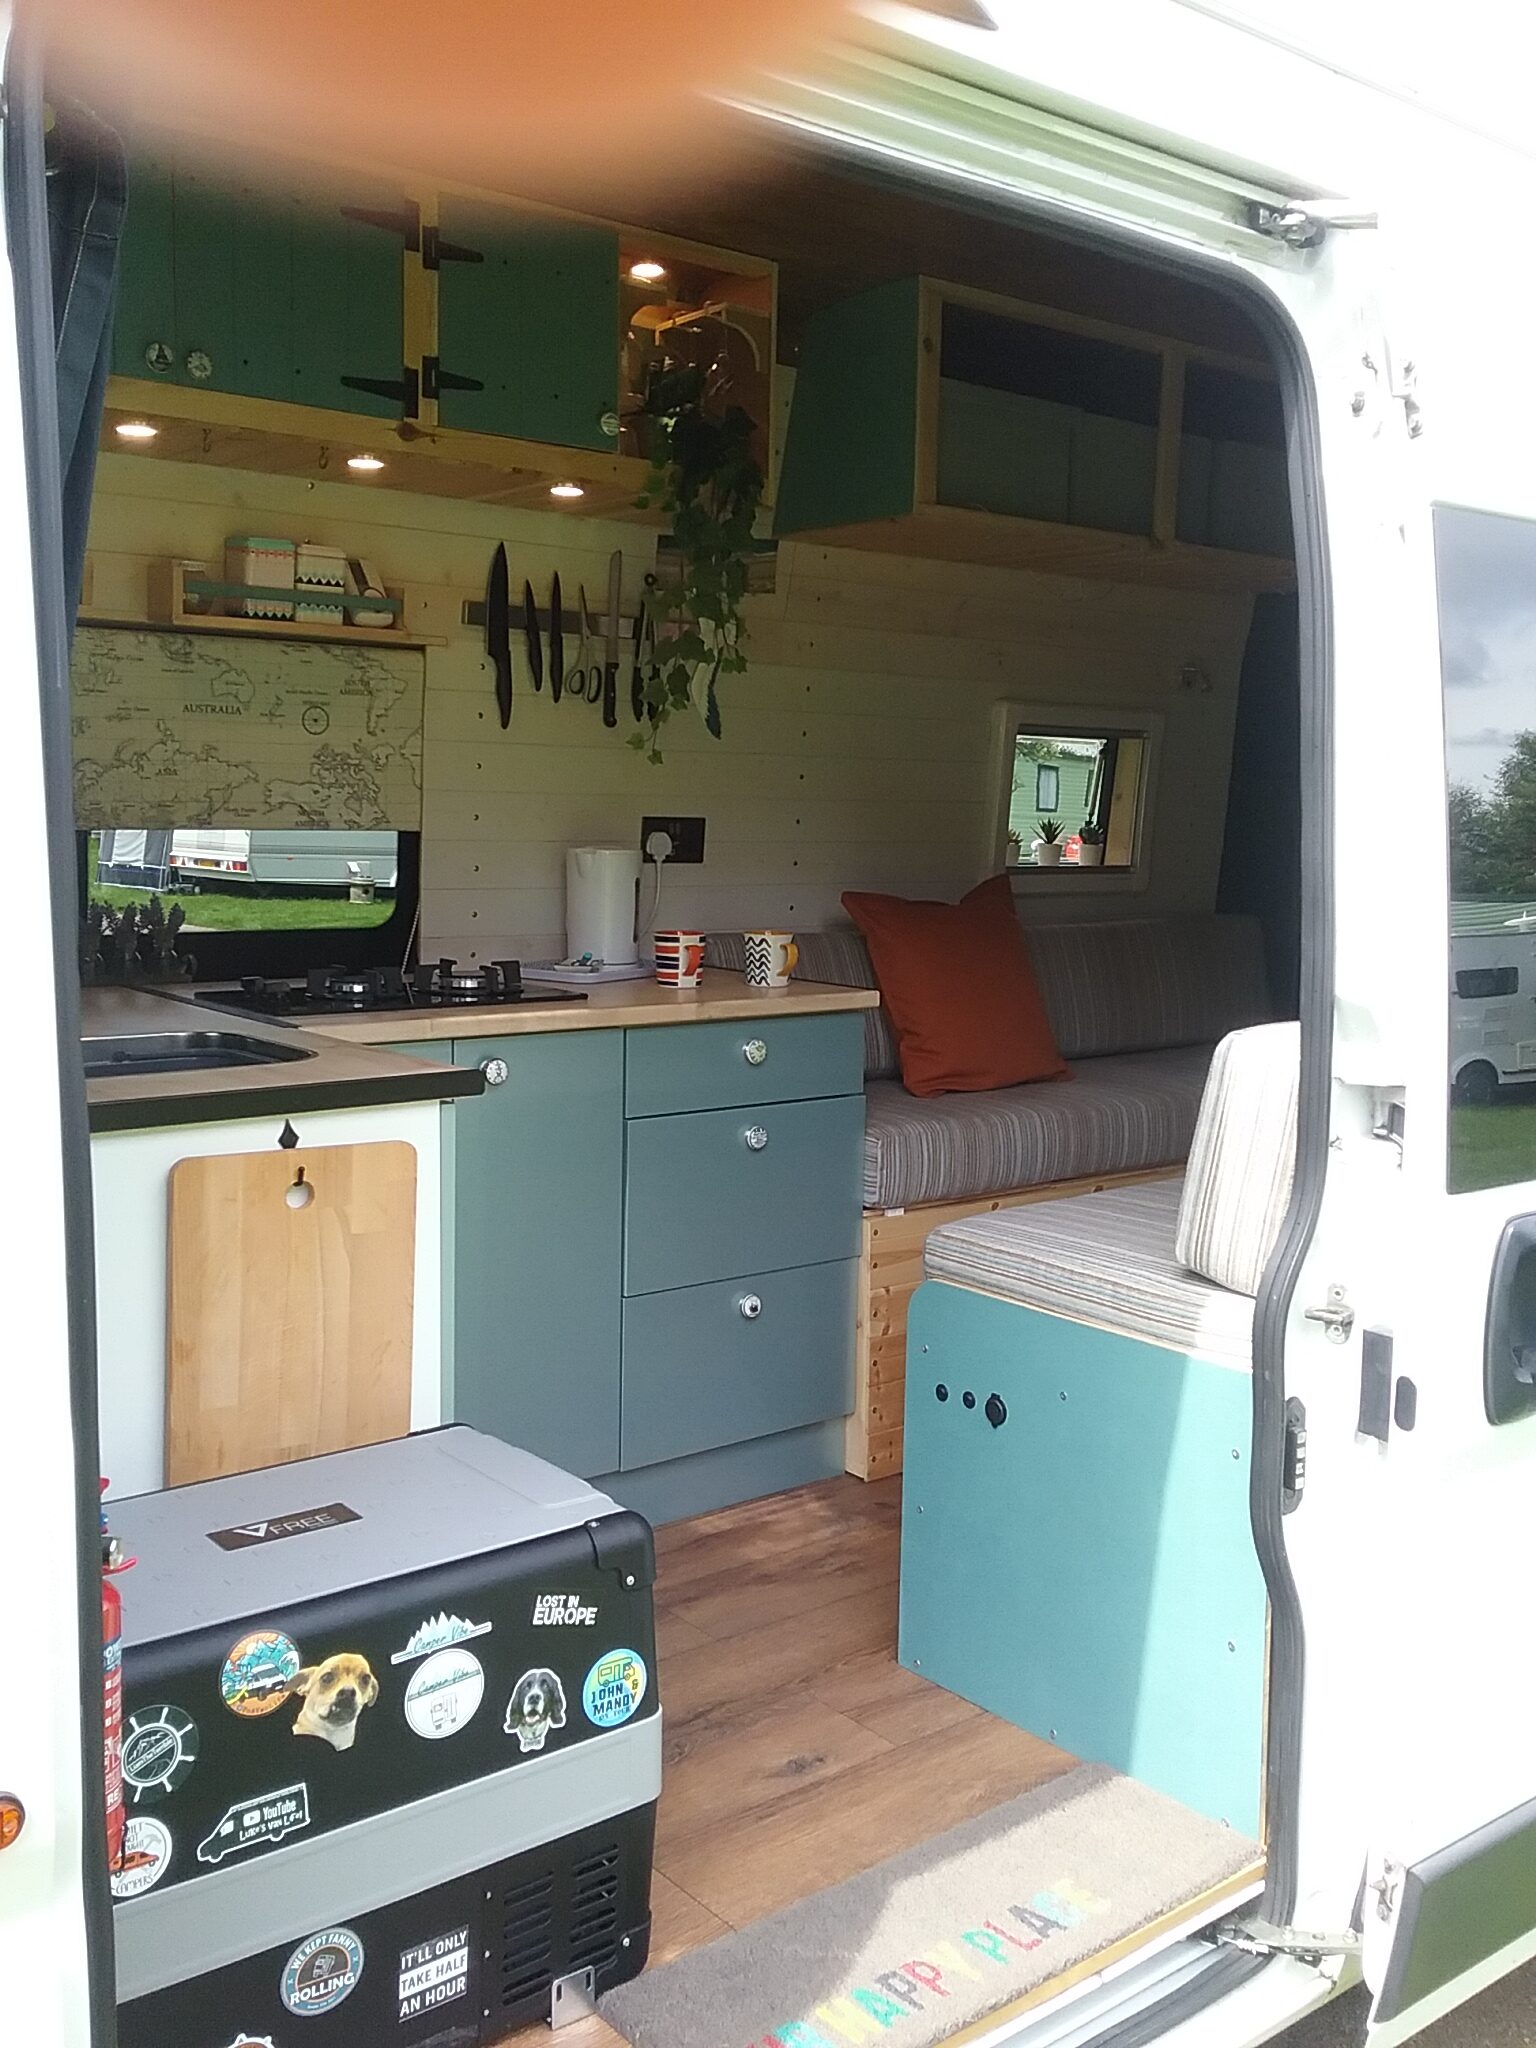 The interior of a camper van is shown with an open door. Inside, there's a small kitchenette with blue cabinets, a countertop with utensils hanging above, and a compact fridge adorned with stickers. A striped couch with orange and beige cushions sits beside a window. Some potted plants hang from the ceiling.